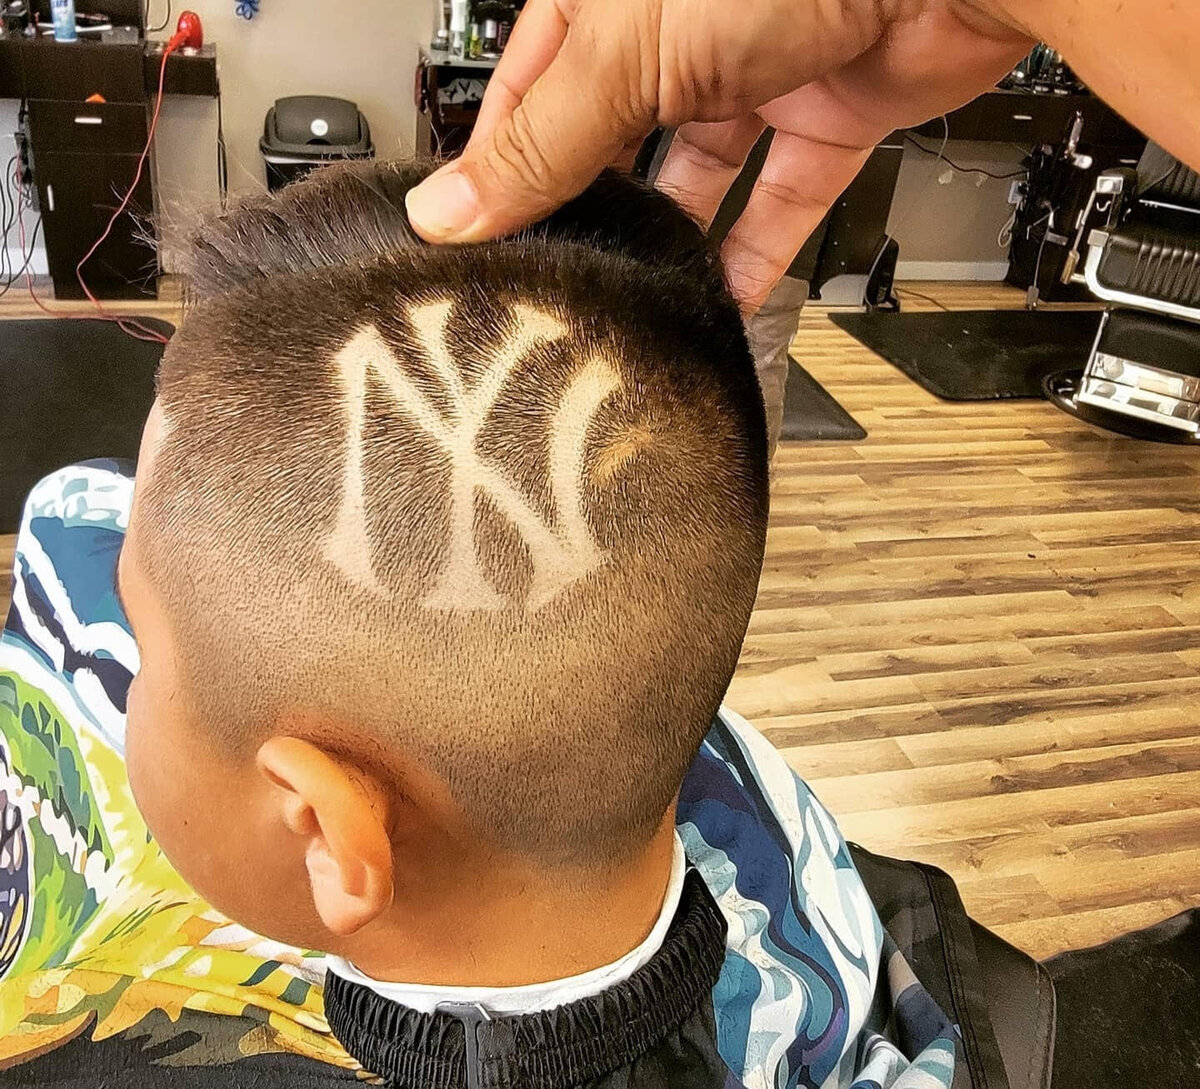 Yankees Fade for Kids - Boy's Fade Hair cut at Whos Your Barber in Venice Florida